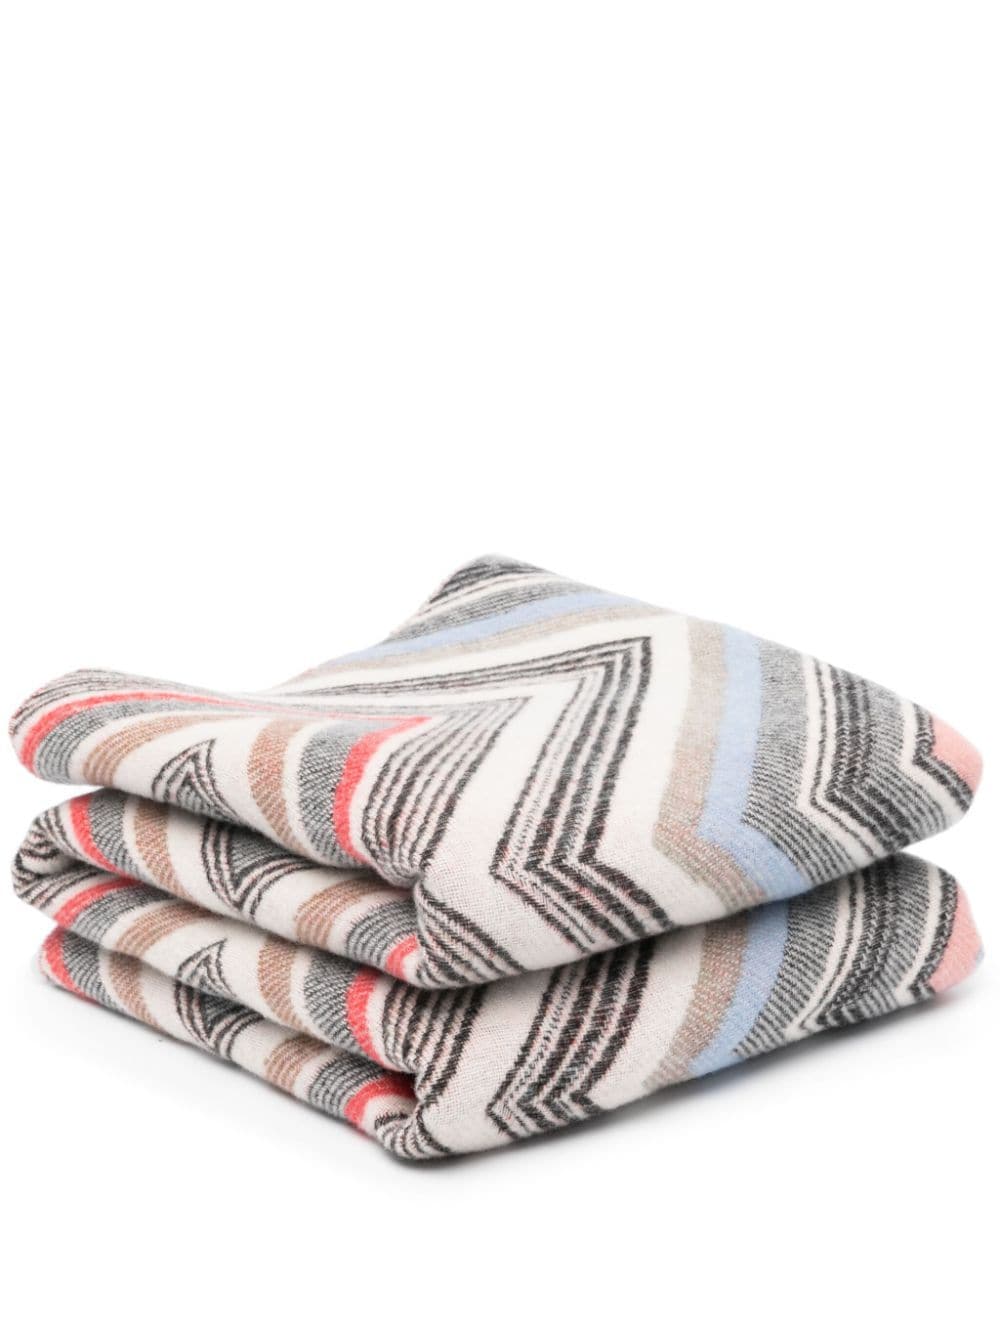 MISSONI ZIGZAG-WOVEN KNITTED BLANKET